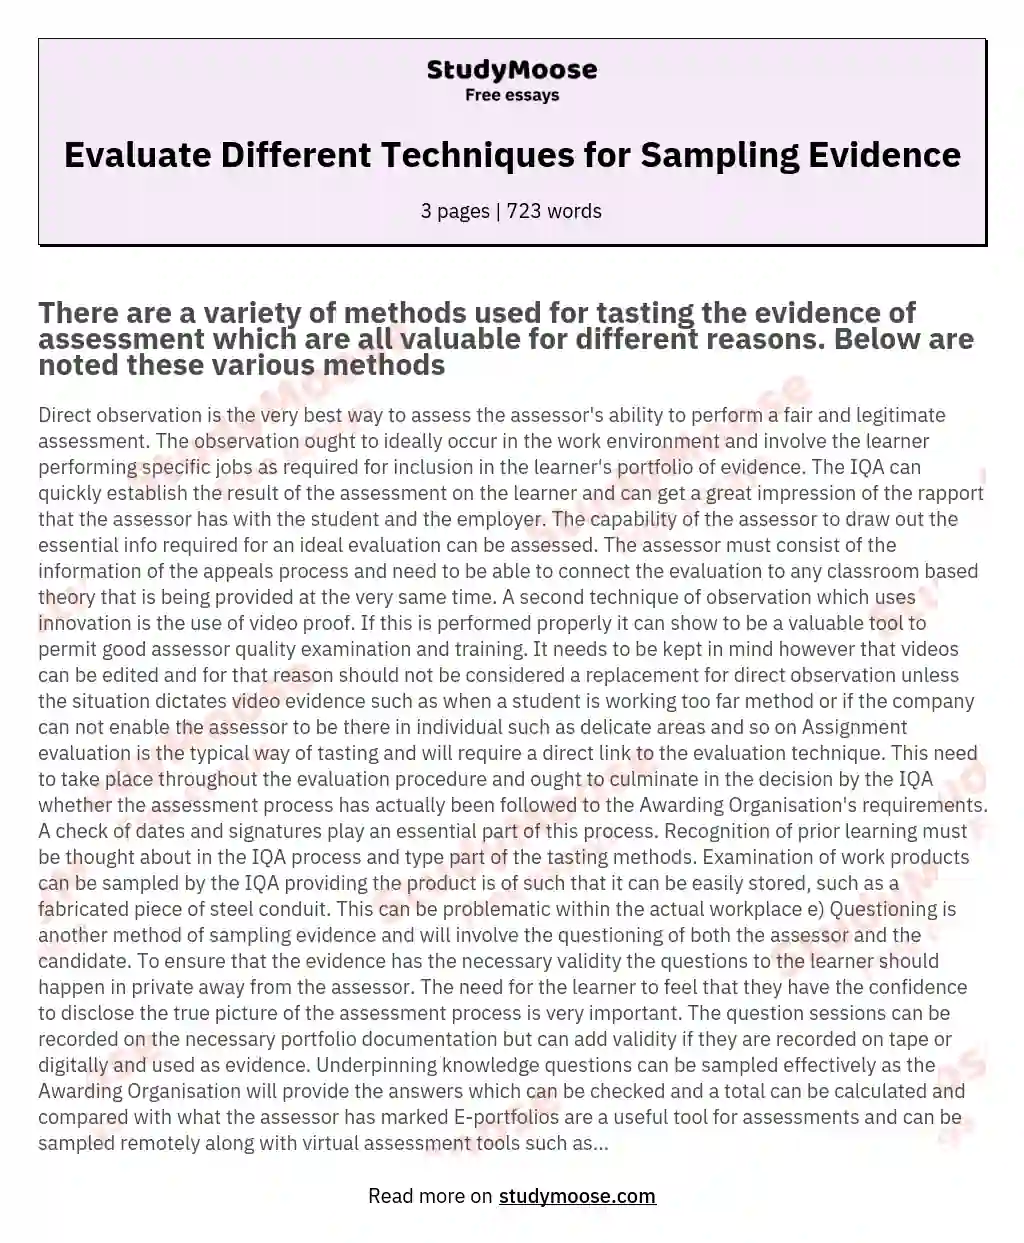 Evaluate Different Techniques for Sampling Evidence essay